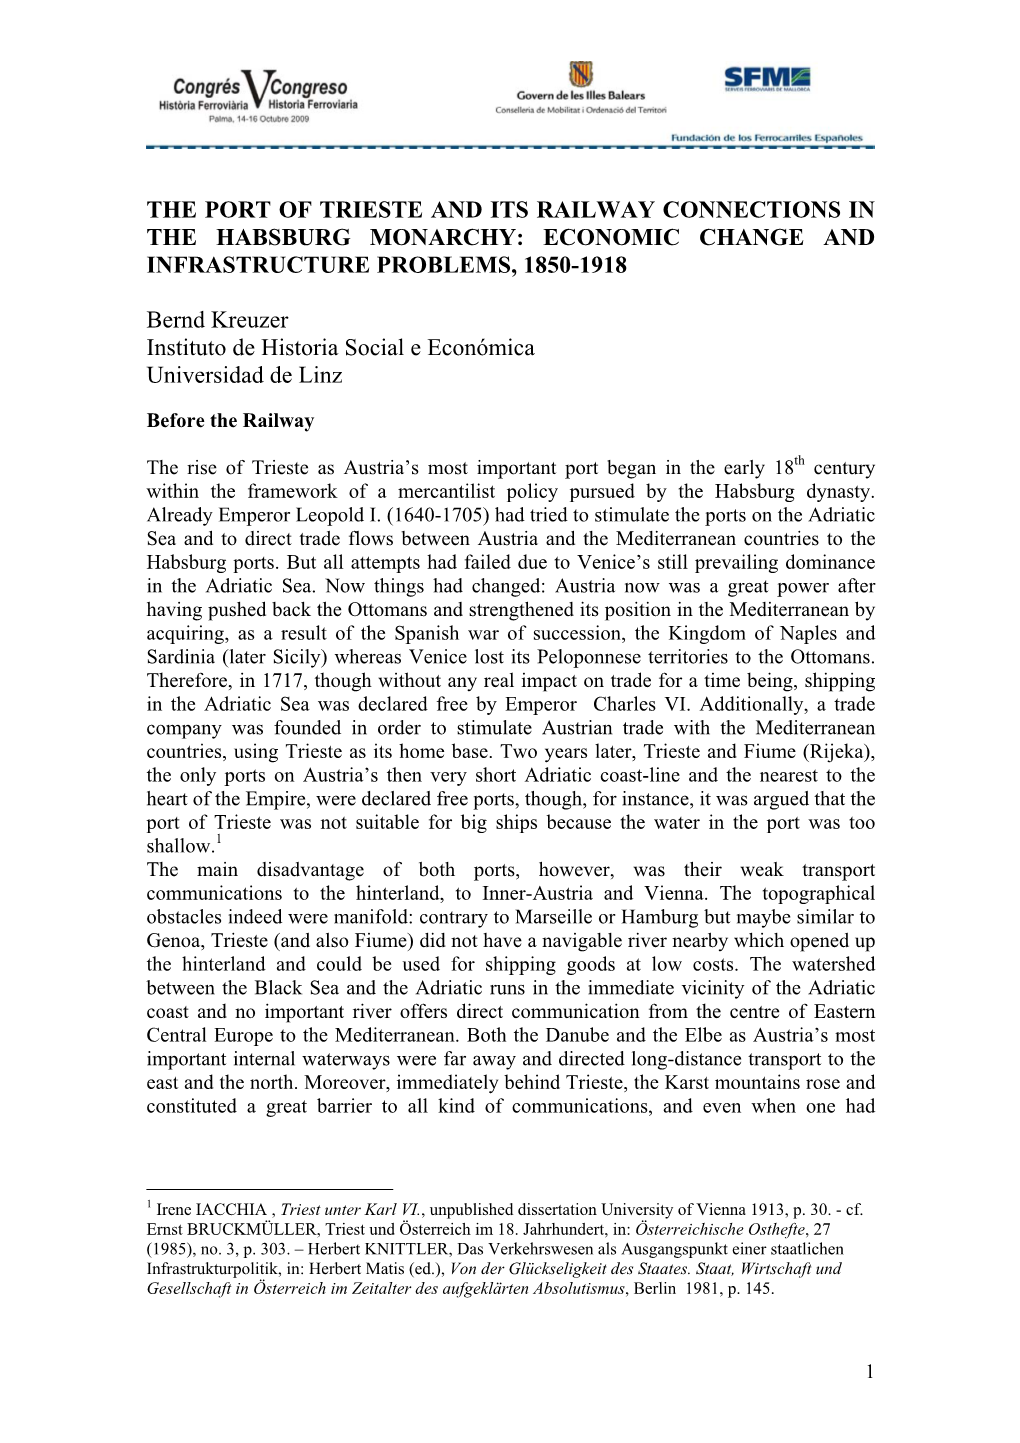 The Port of Trieste and Its Railway Connections in the Habsburg Monarchy: Economic Change and Infrastructure Problems, 1850-1918